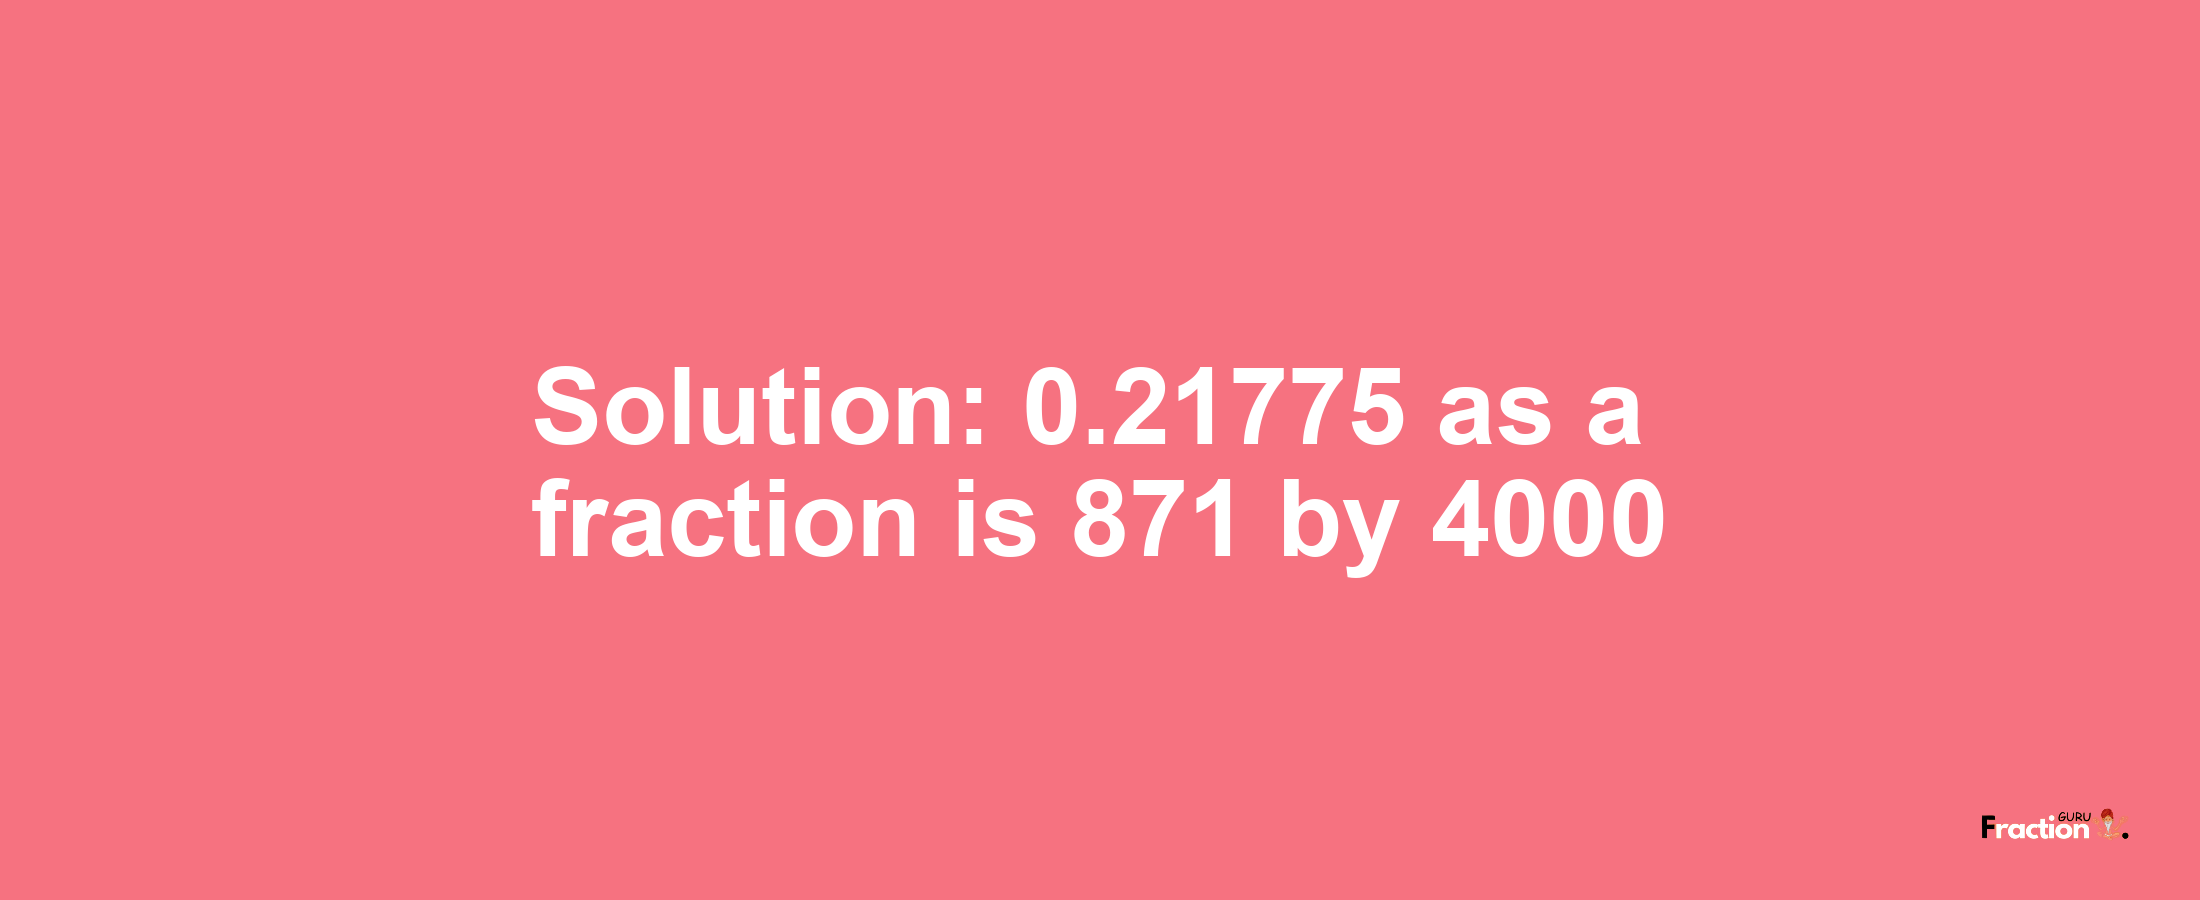 Solution:0.21775 as a fraction is 871/4000